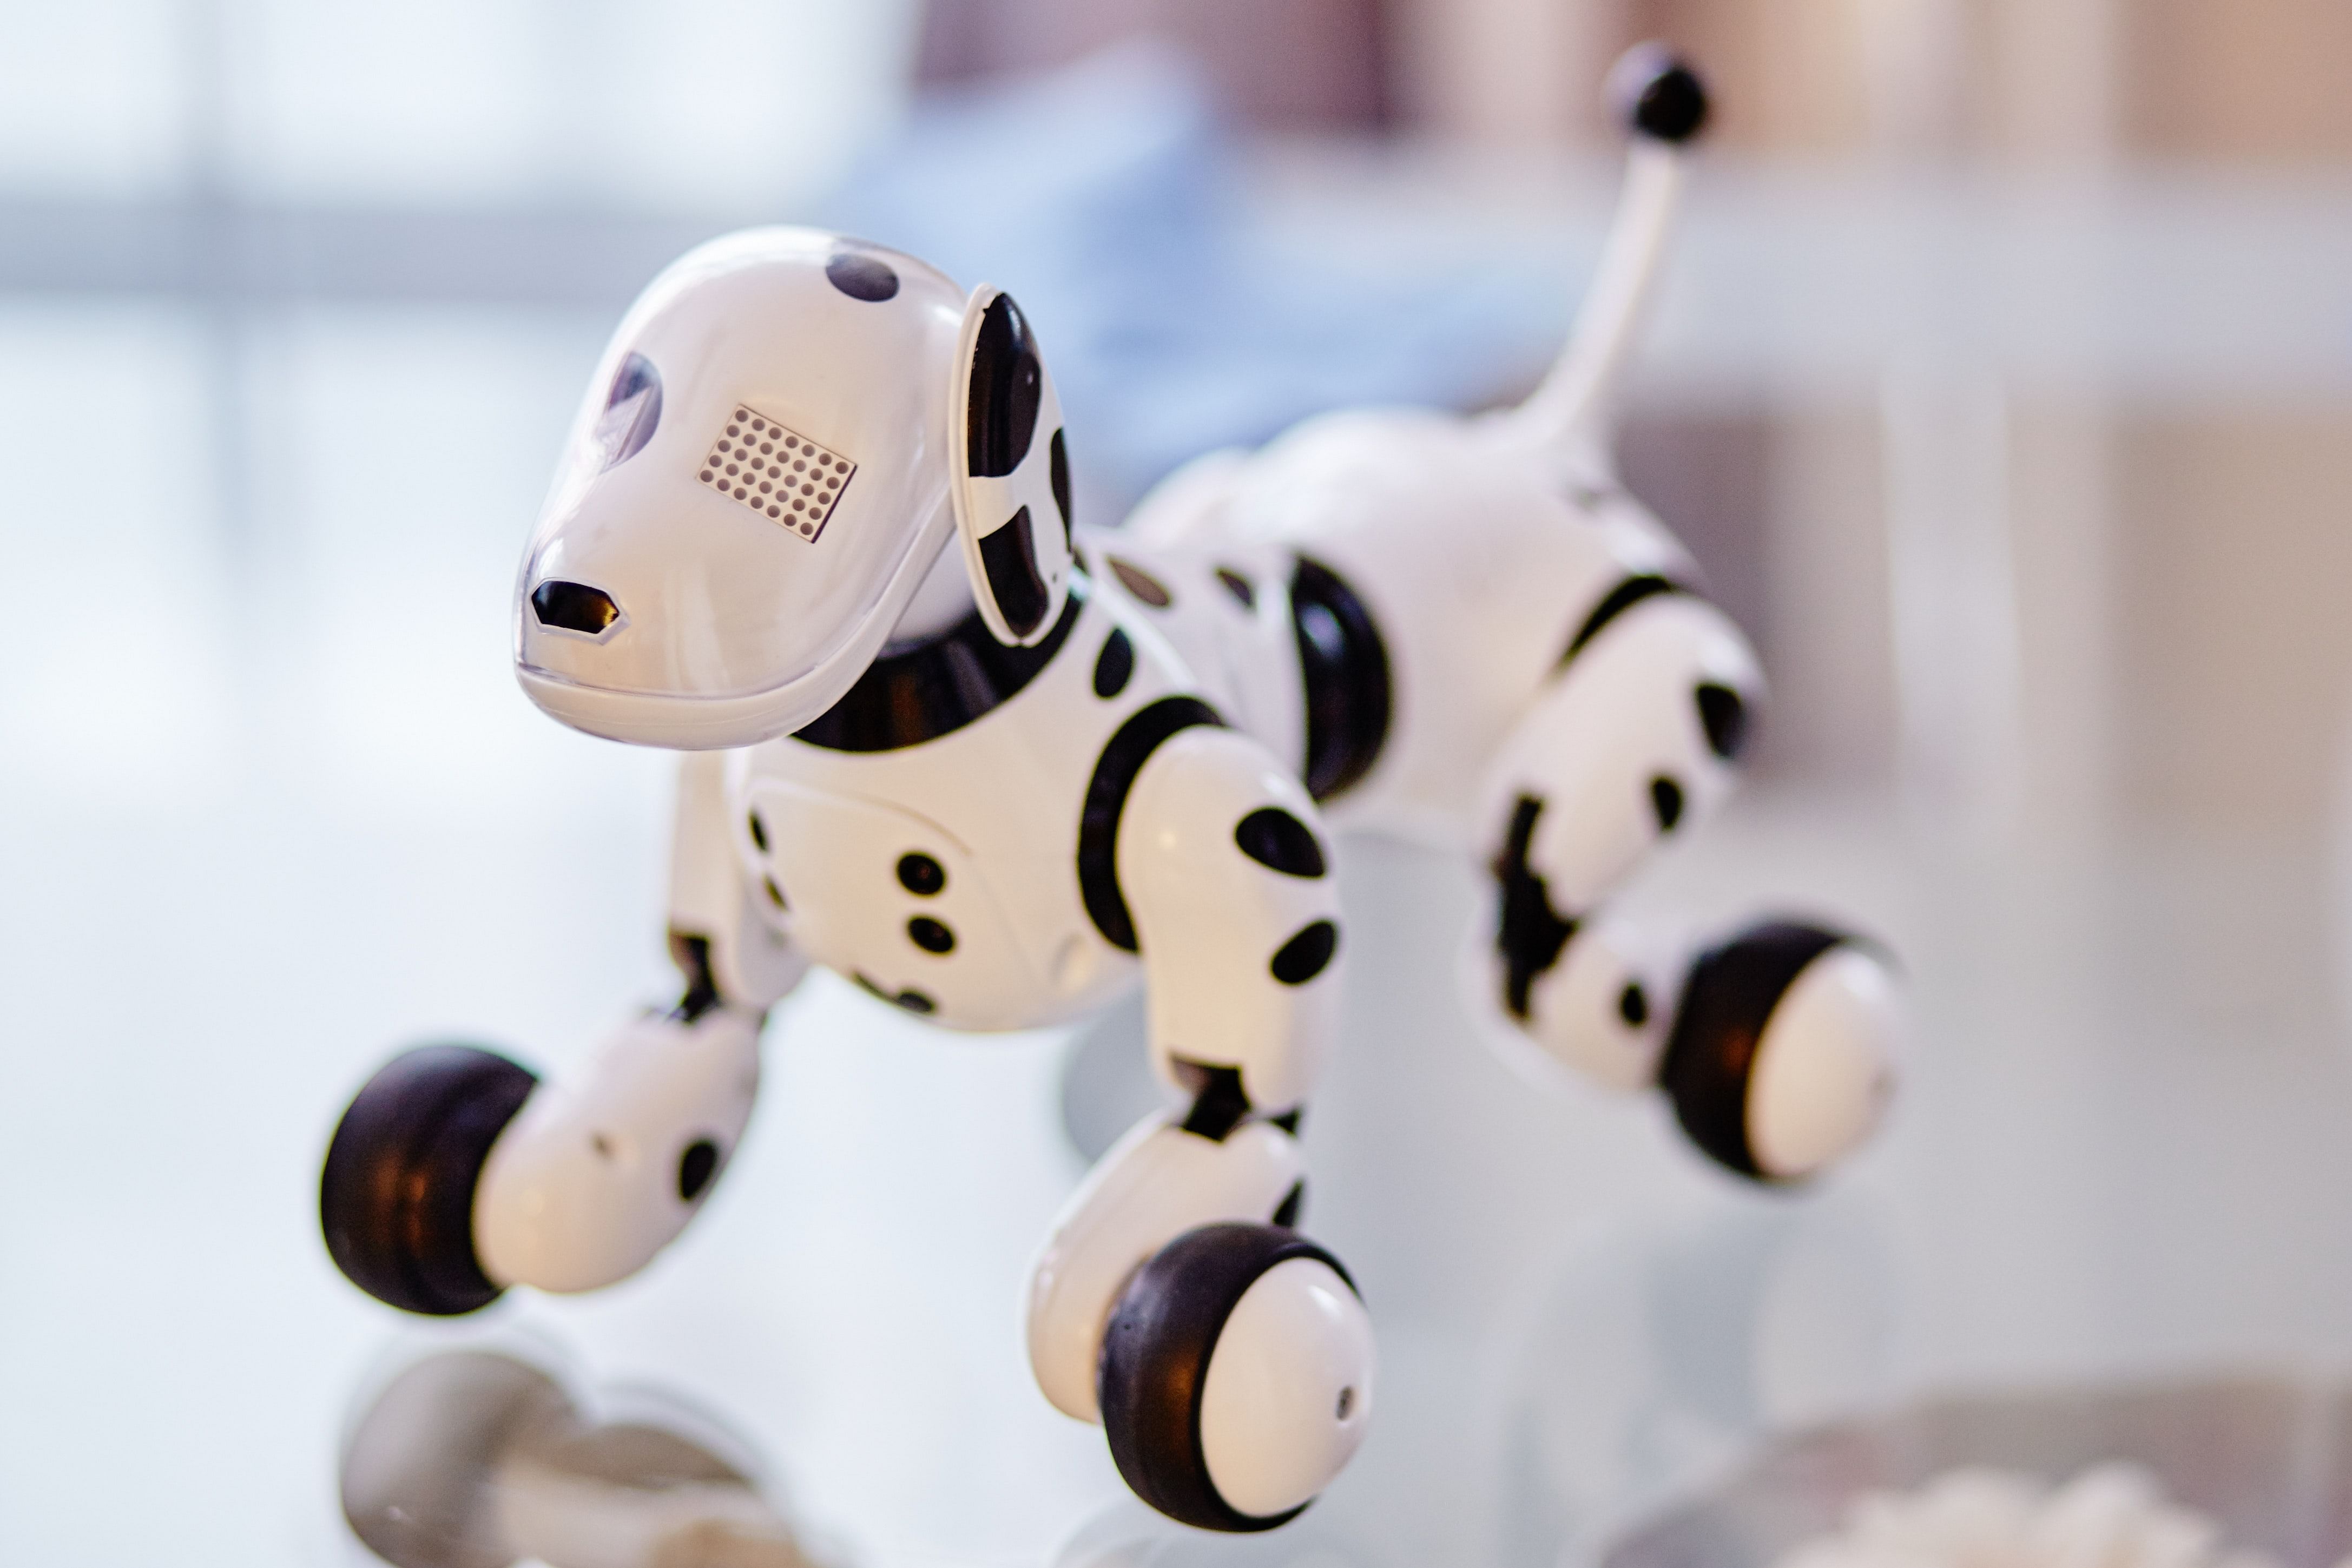 Dubbed Stanford Doggo, the robot can be easily built by anyone by consulting comprehensive plans, code and a supply list that the researchers have made freely available online. File photo for representation